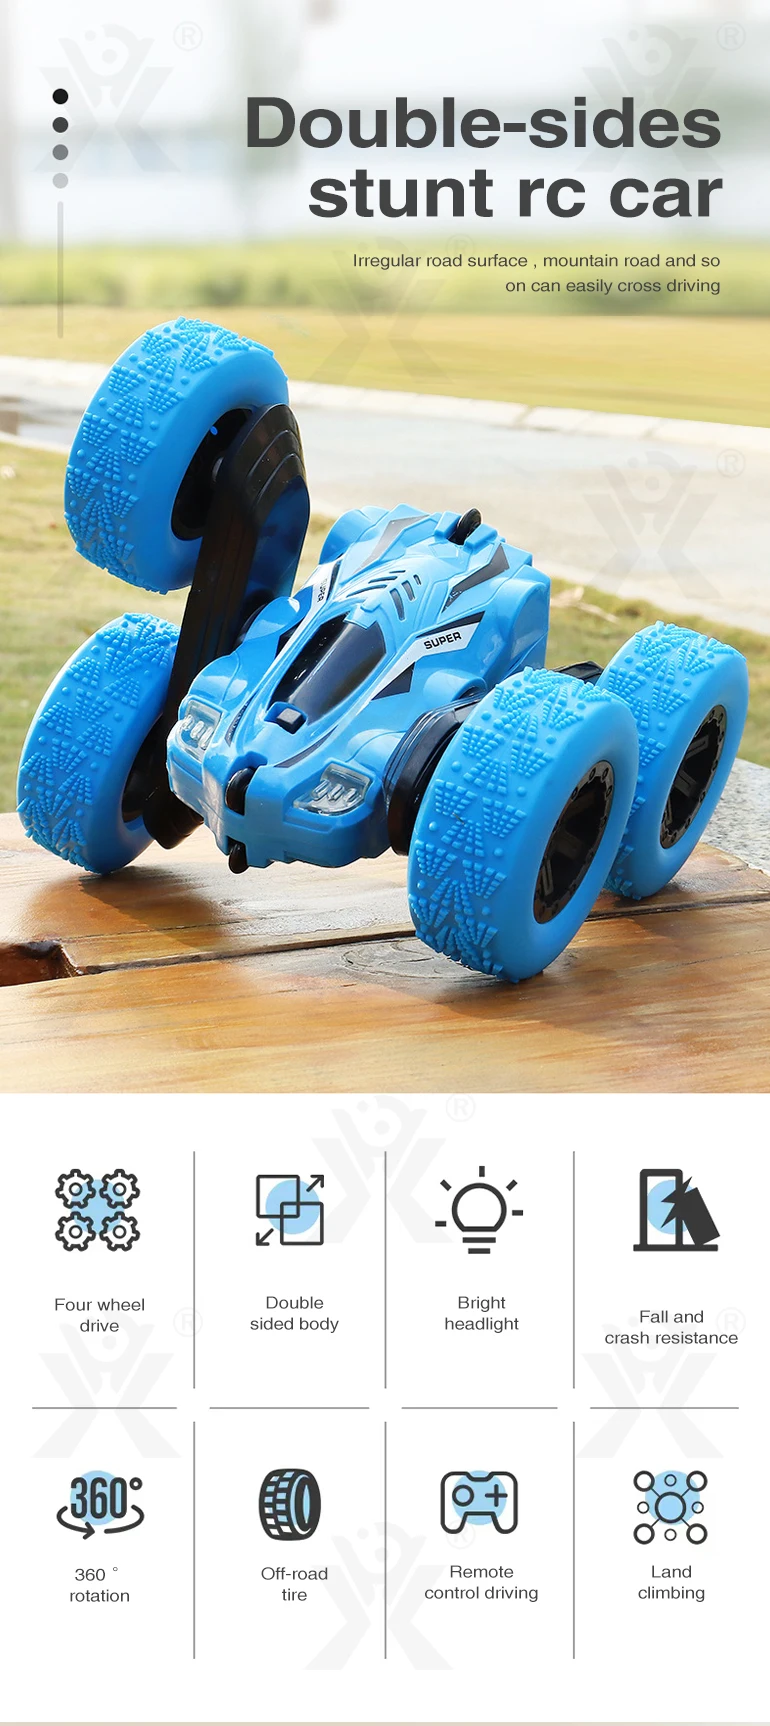 Chengji 360 rotating toys flips stunt car double sided rotating 4wd 360 degrees remote control double-sided 4wd stunt car